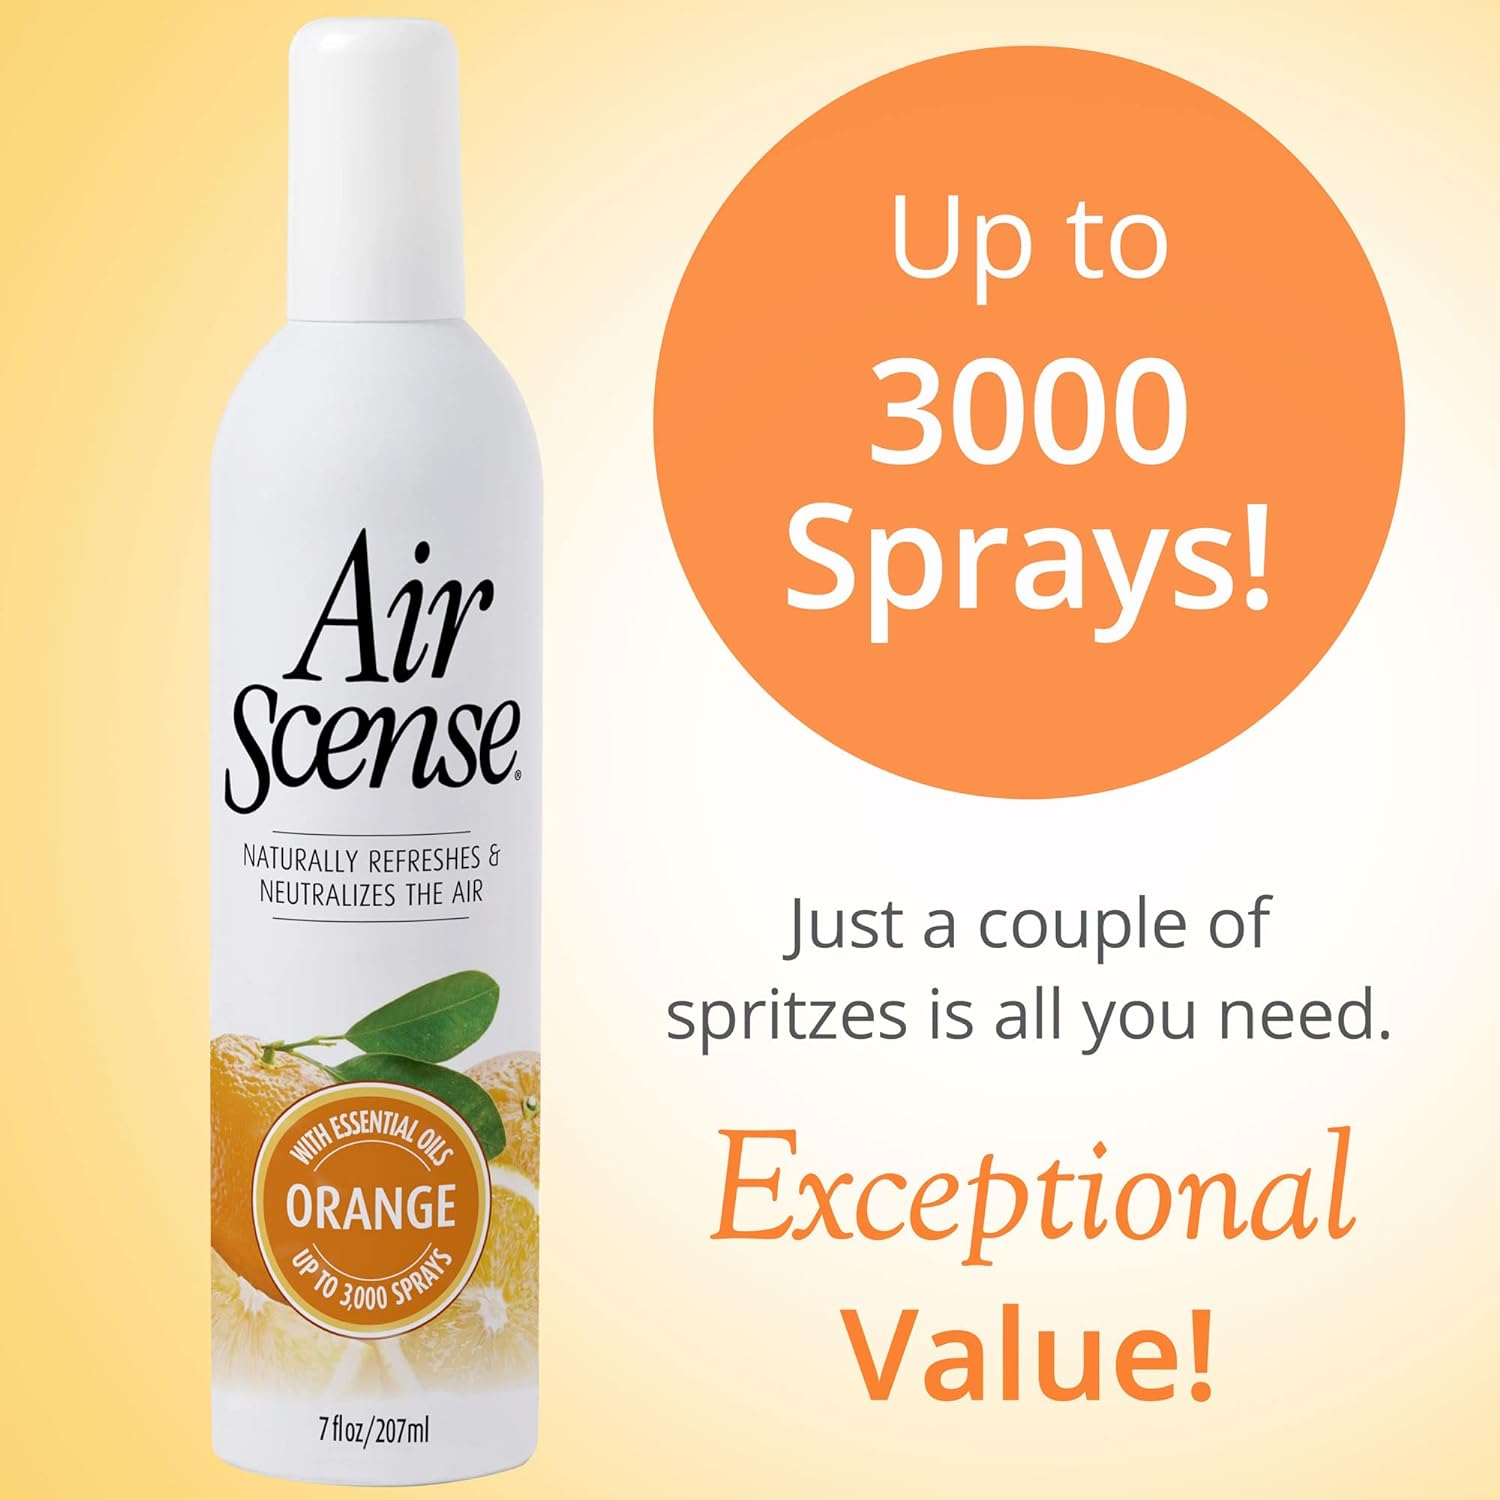 Citra Solv Air Scense Essential Oil Air Freshener - Orange Scent - Non-Aerosol - 7 Ounce | Refreshing, Long-Lasting Scent | Eco-Friendly | Exceptional Value : Health & Household